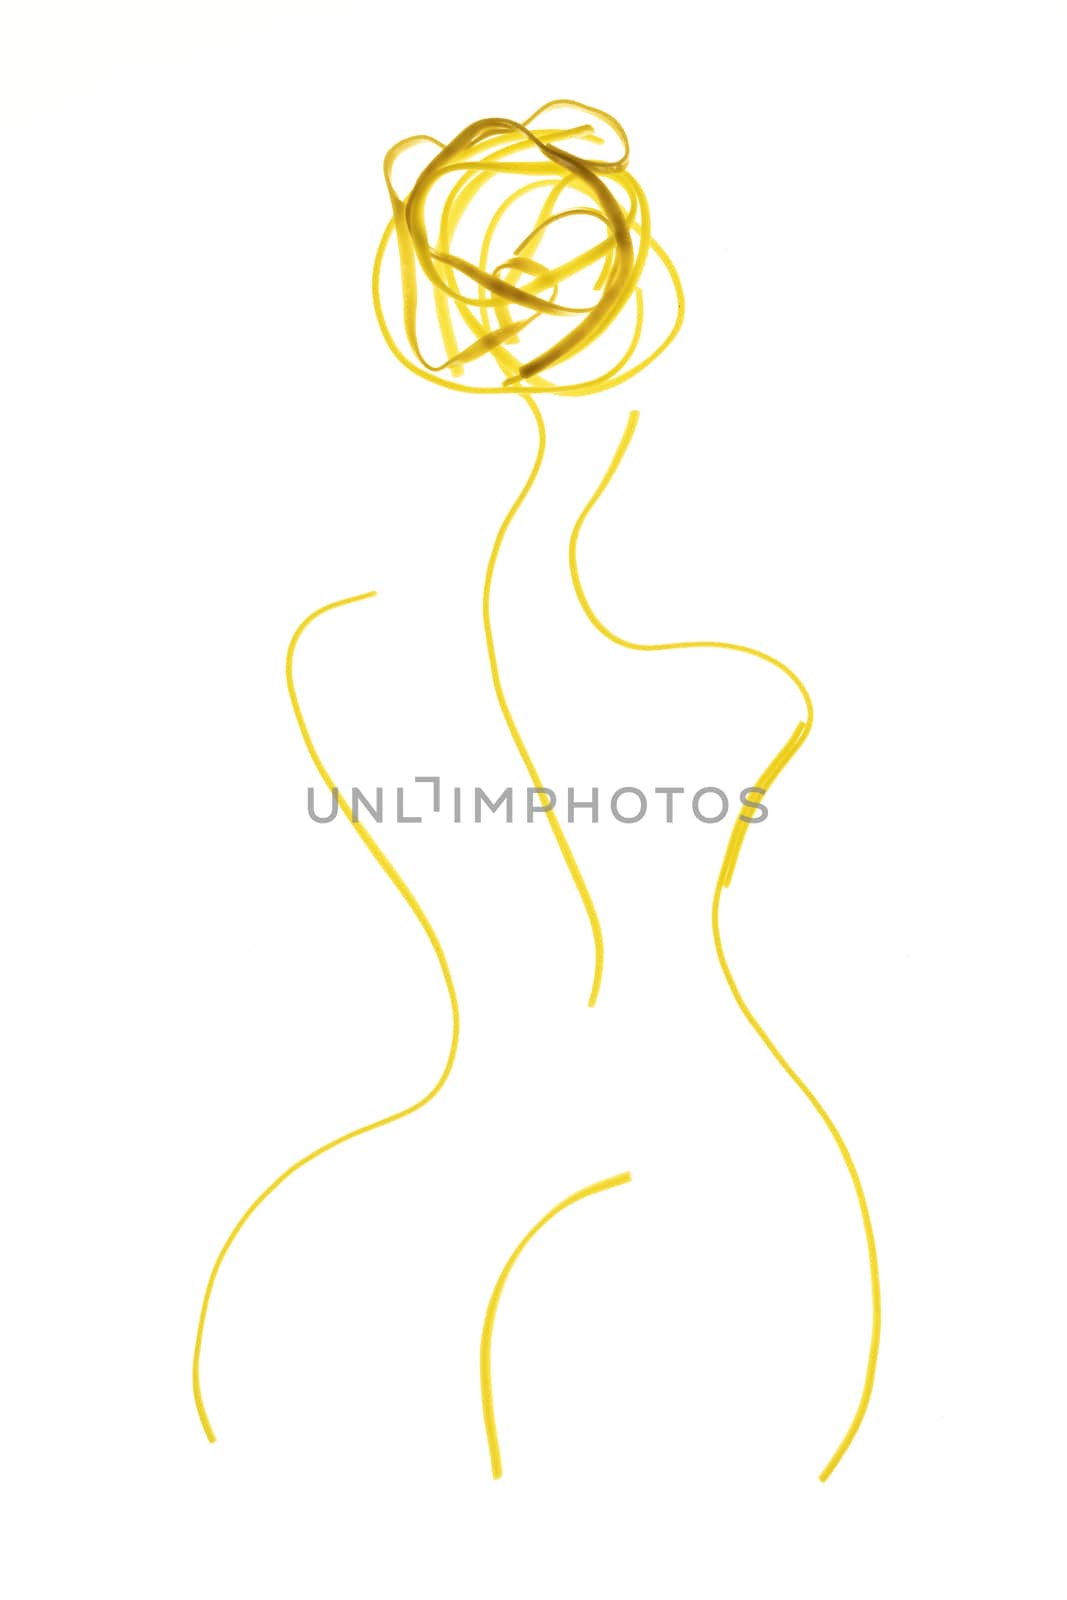 Swirls of cooked spaghetti. Spaghetti in the shape of a woman's body